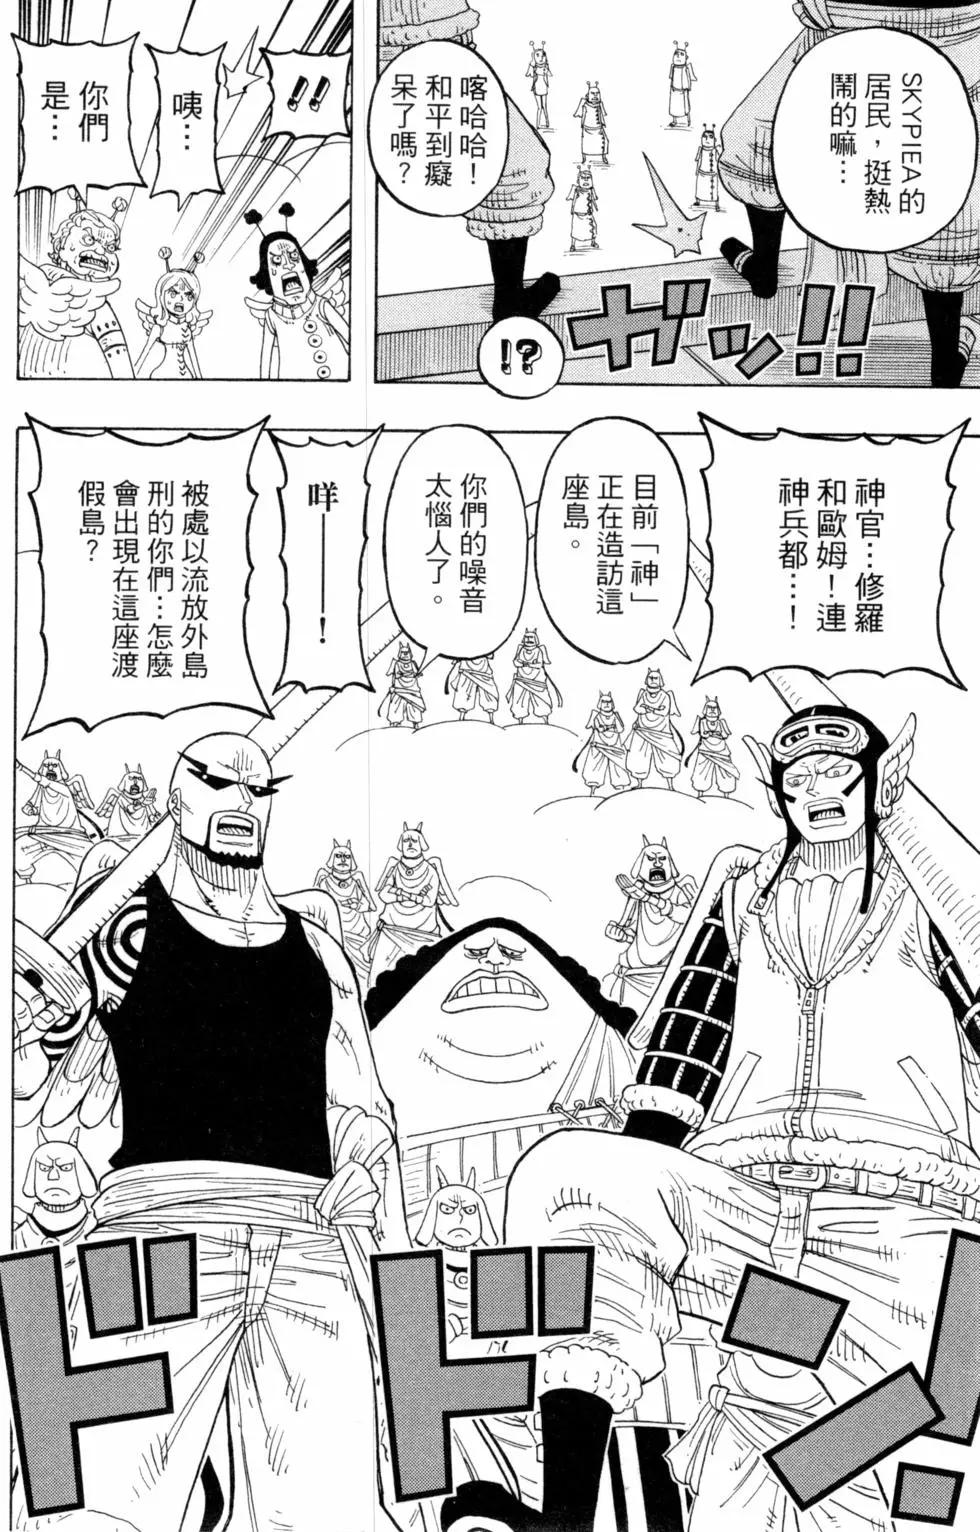 One piece party - 第06卷(2/4) - 7